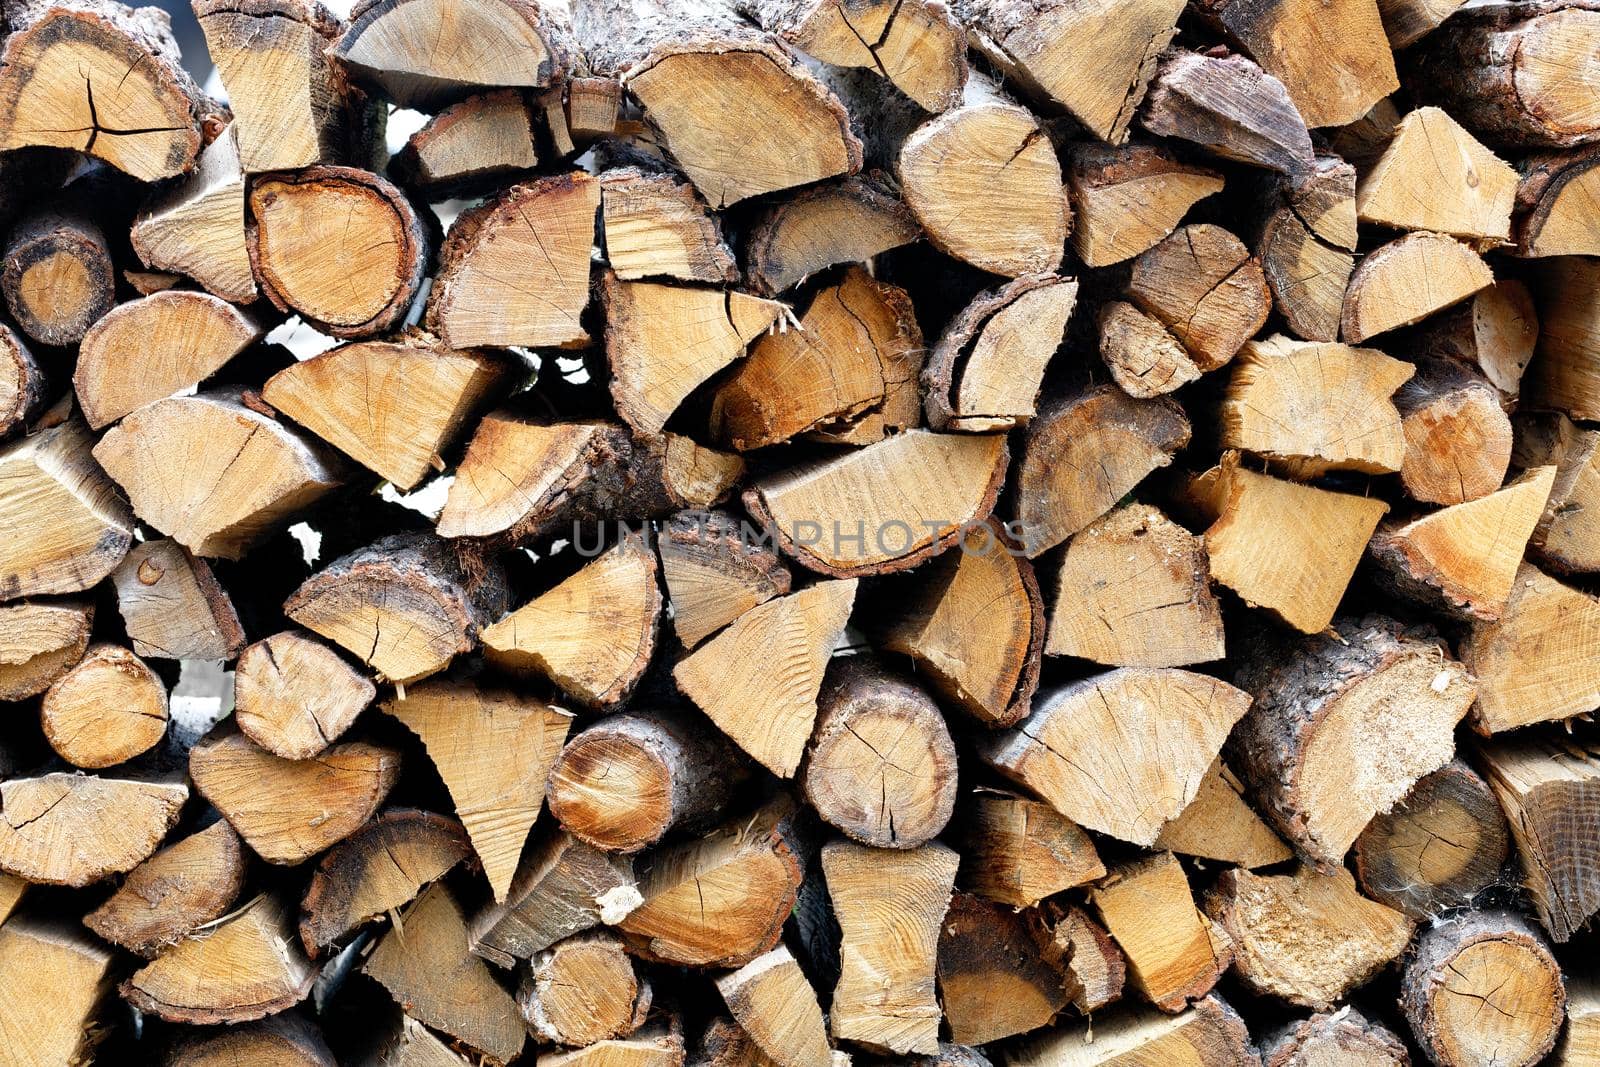 Roughly chopped wood, neatly stacked on top of each other. by Sergii